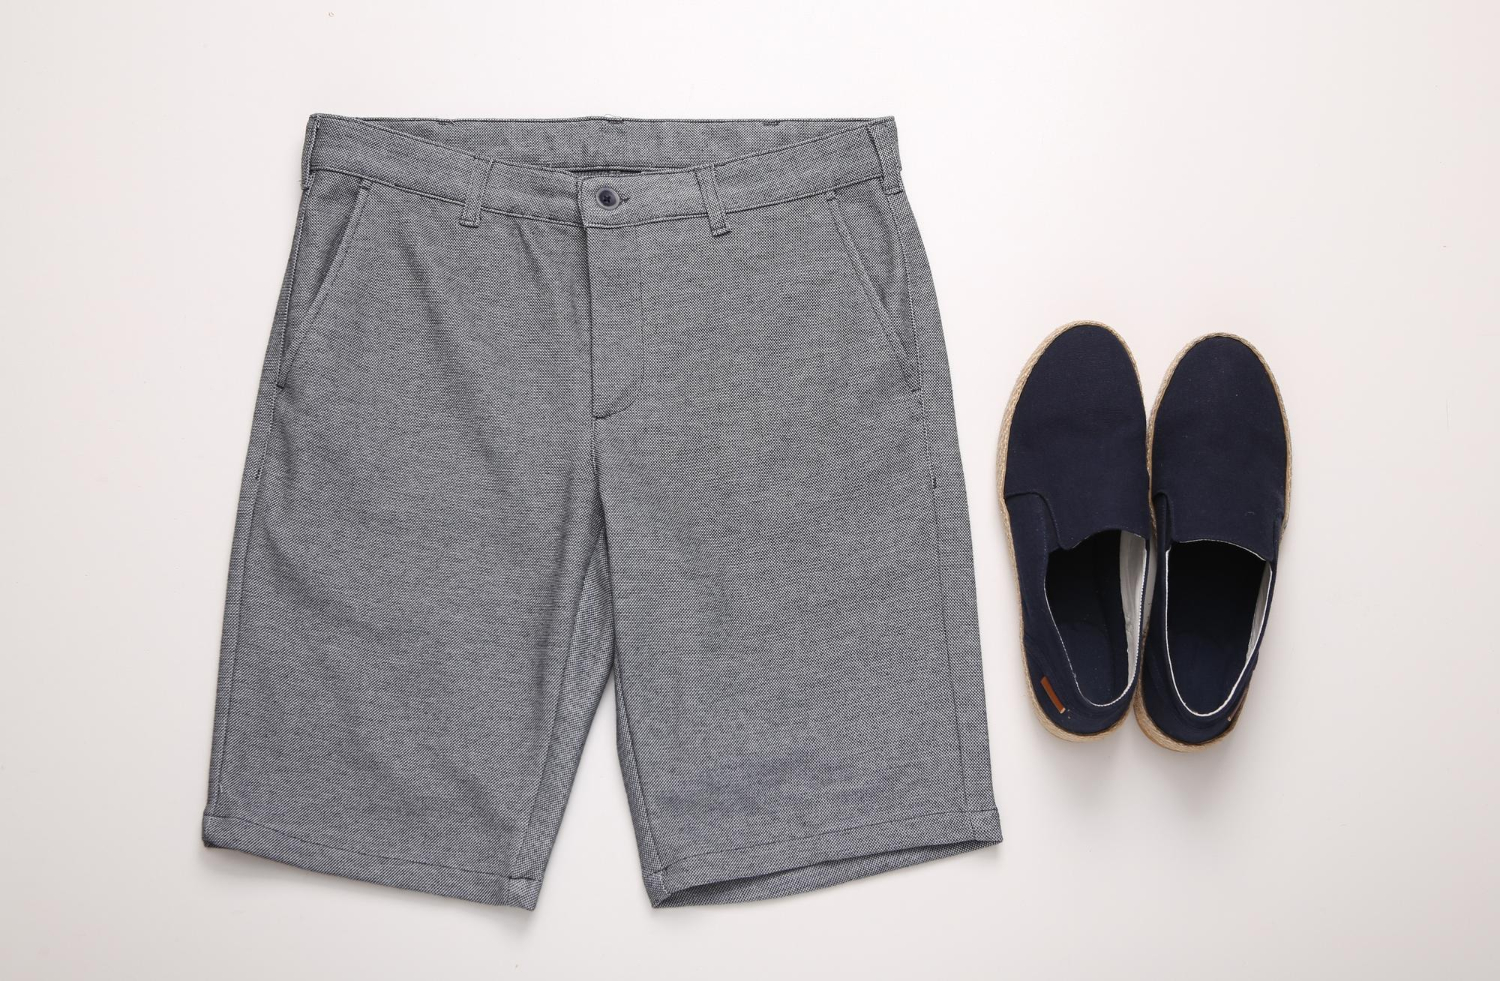 Gray shorts with summer navy slip-on shoes